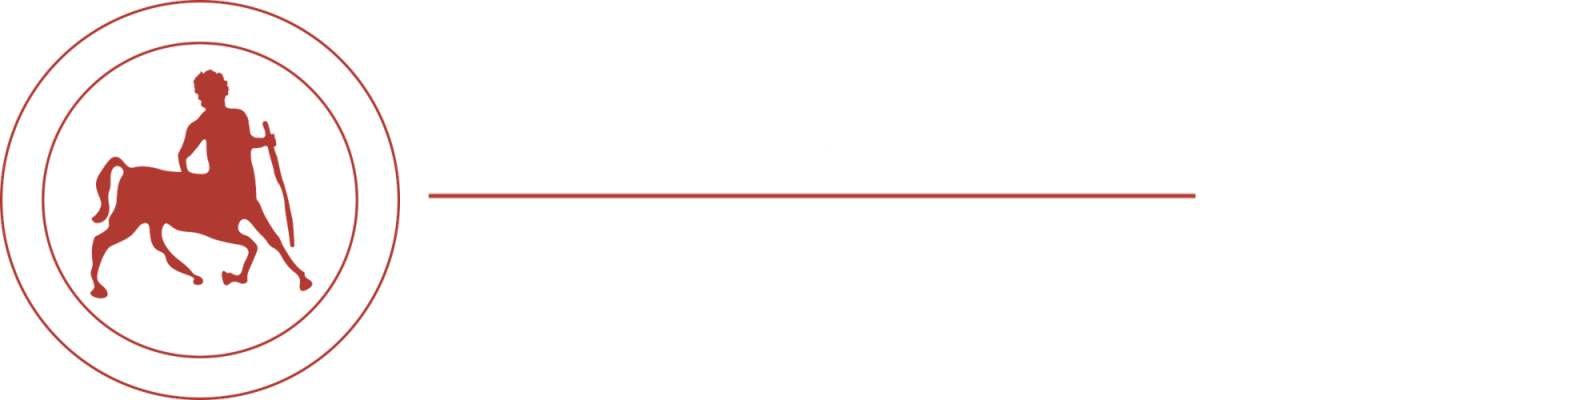 Department of Animal Science